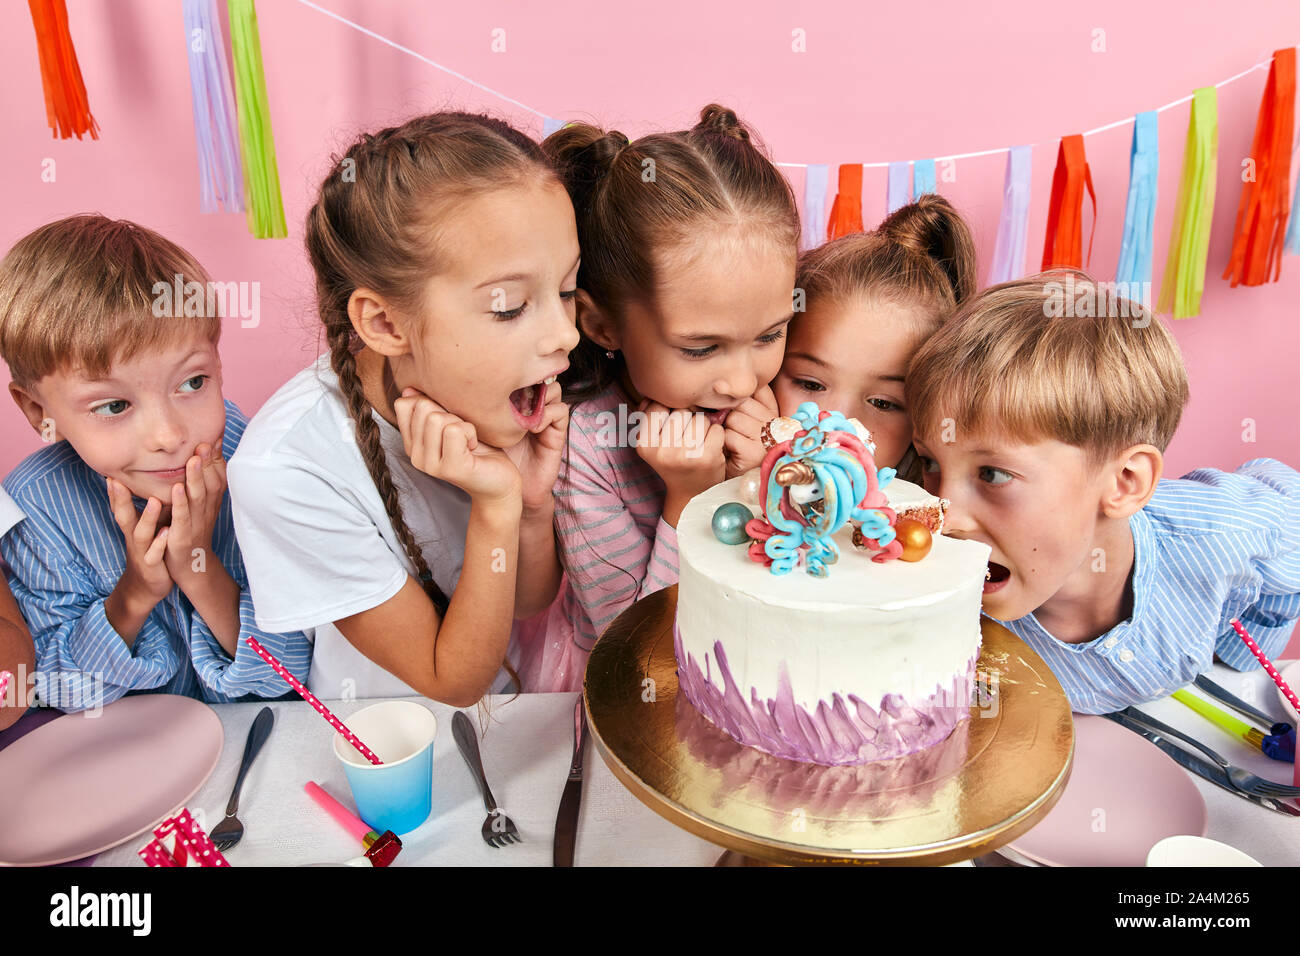 Make My Wish Come True High Resolution Stock Photography And Images Alamy